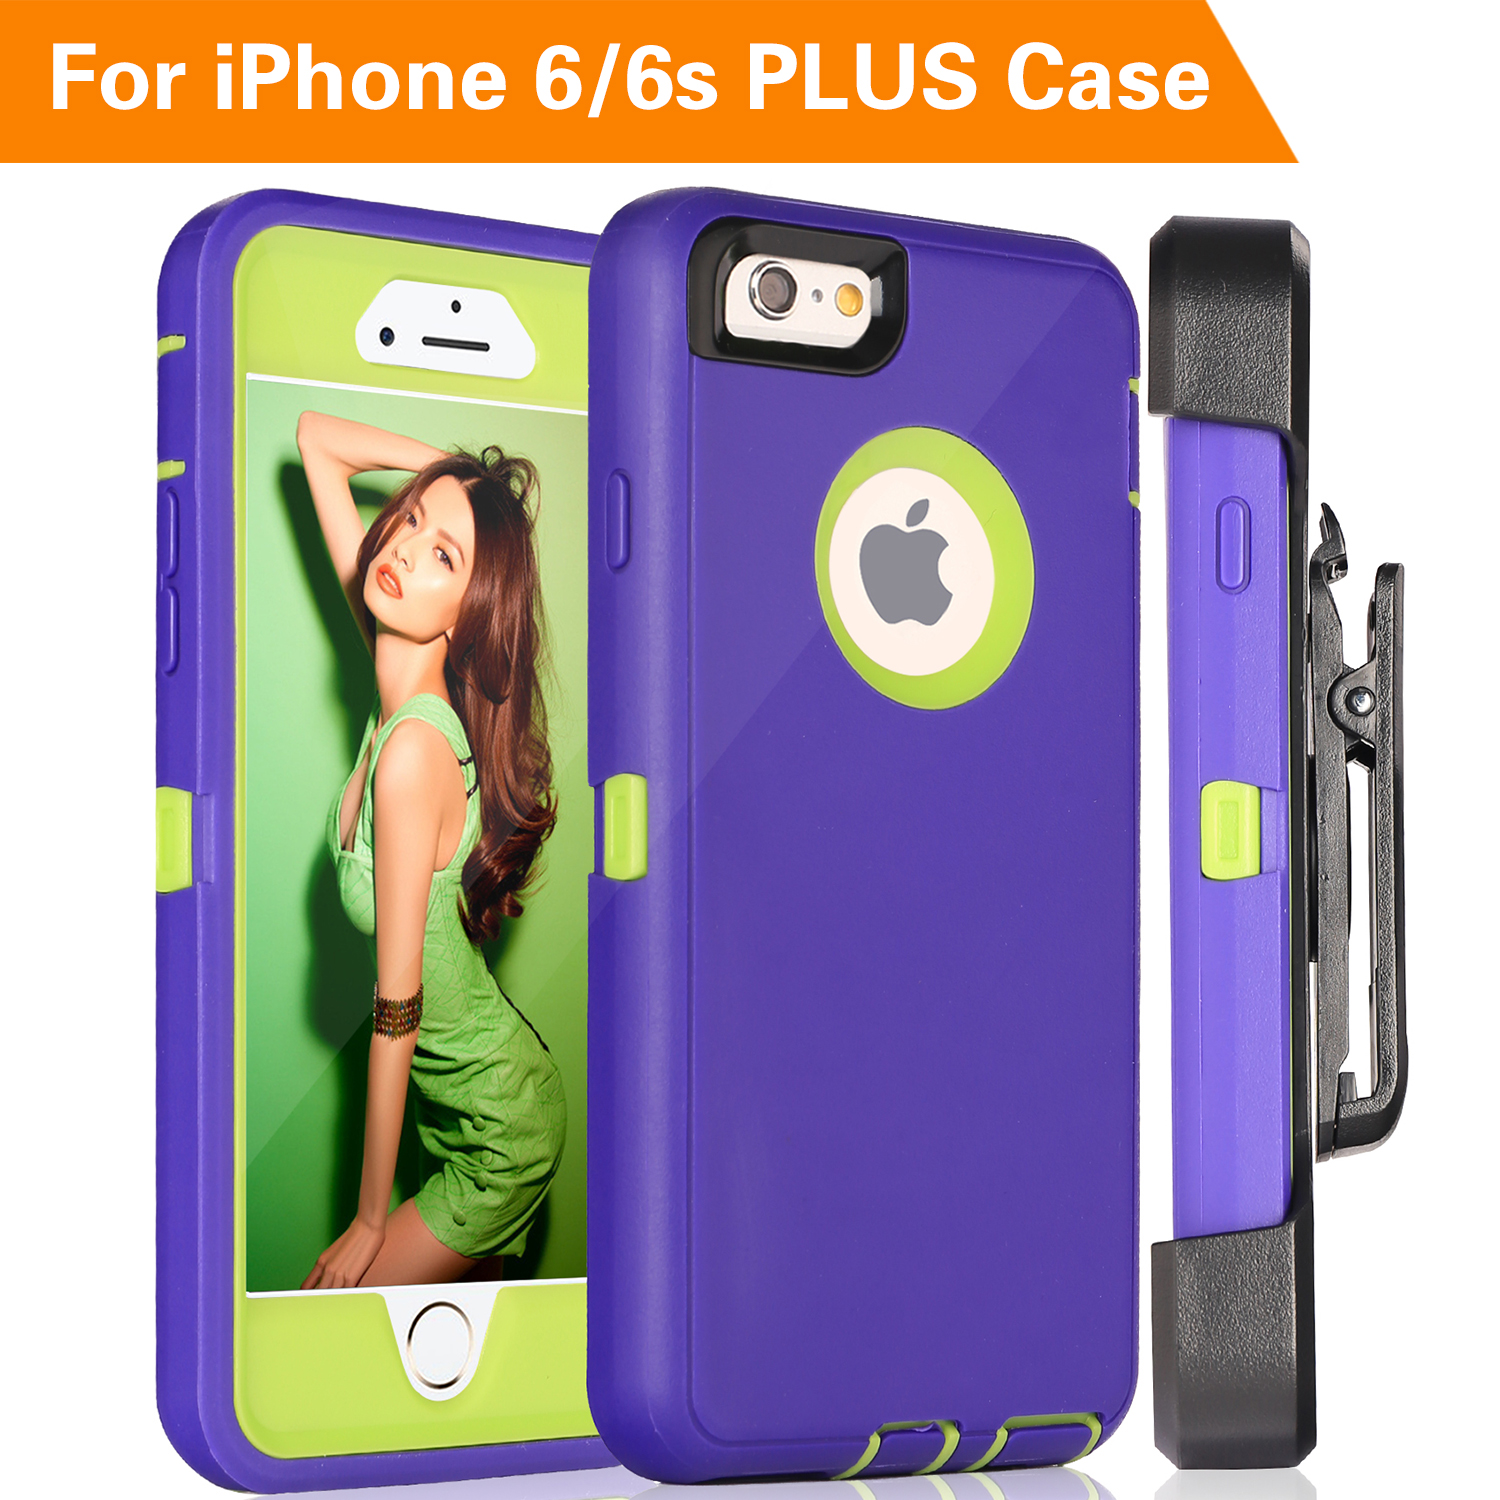 iPhone 6S Plus Case,FOGEEK Protective Case Heavy Duty Cover Compatible for iPhone 6 Plus & iPhone 6S Plus 5.5 inch 360 Degree Rotary Belt Clip & Kickstand(Purple/Green) 